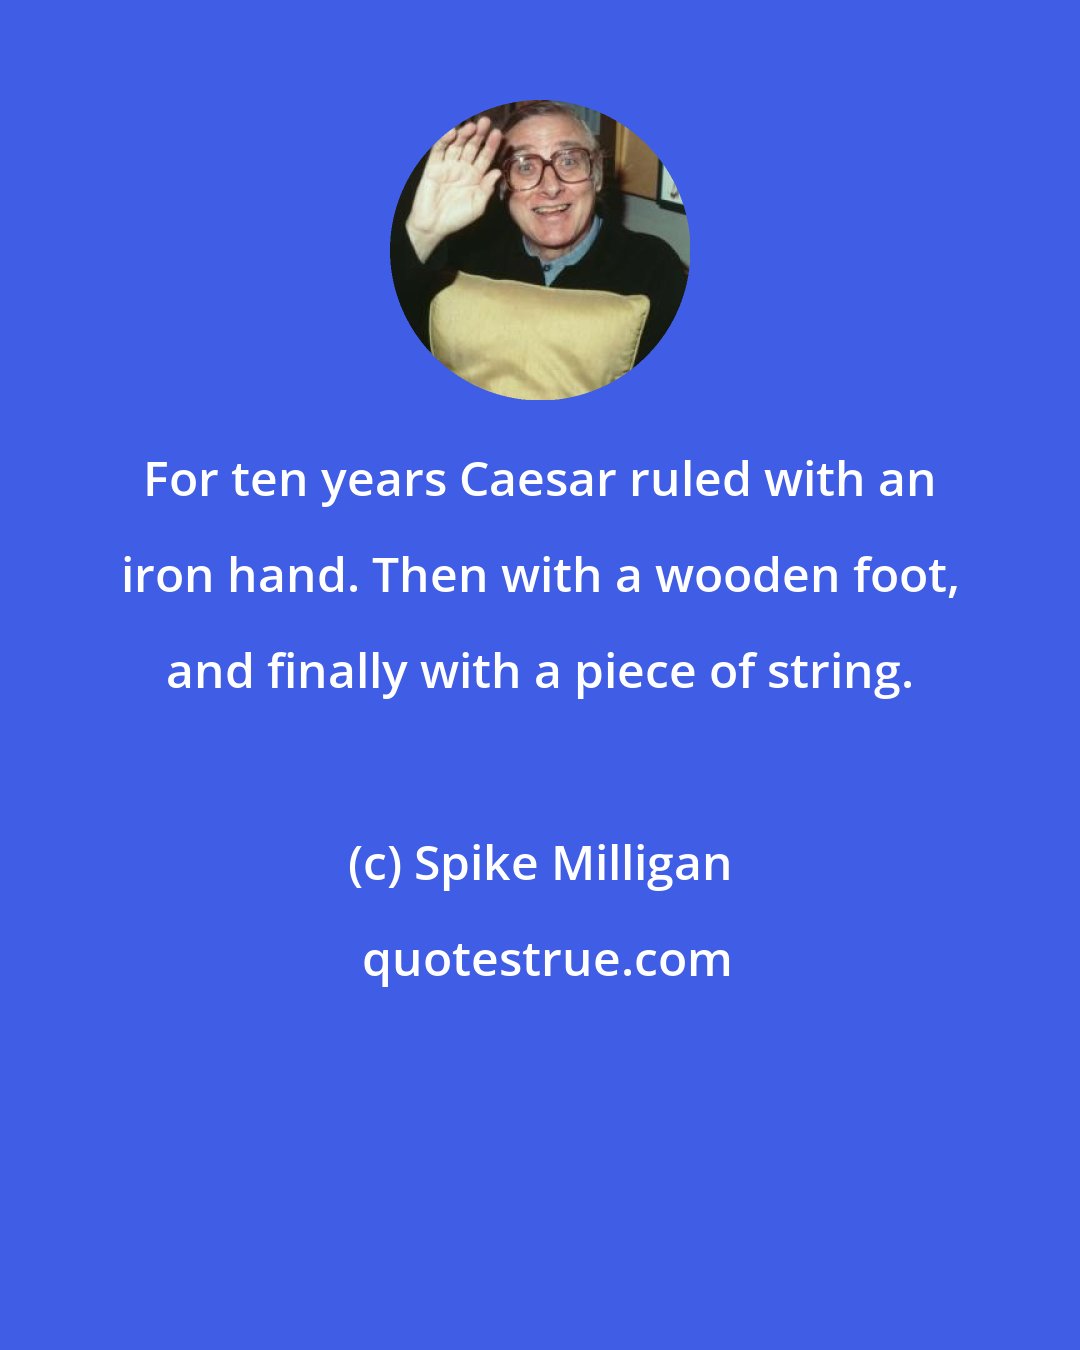 Spike Milligan: For ten years Caesar ruled with an iron hand. Then with a wooden foot, and finally with a piece of string.